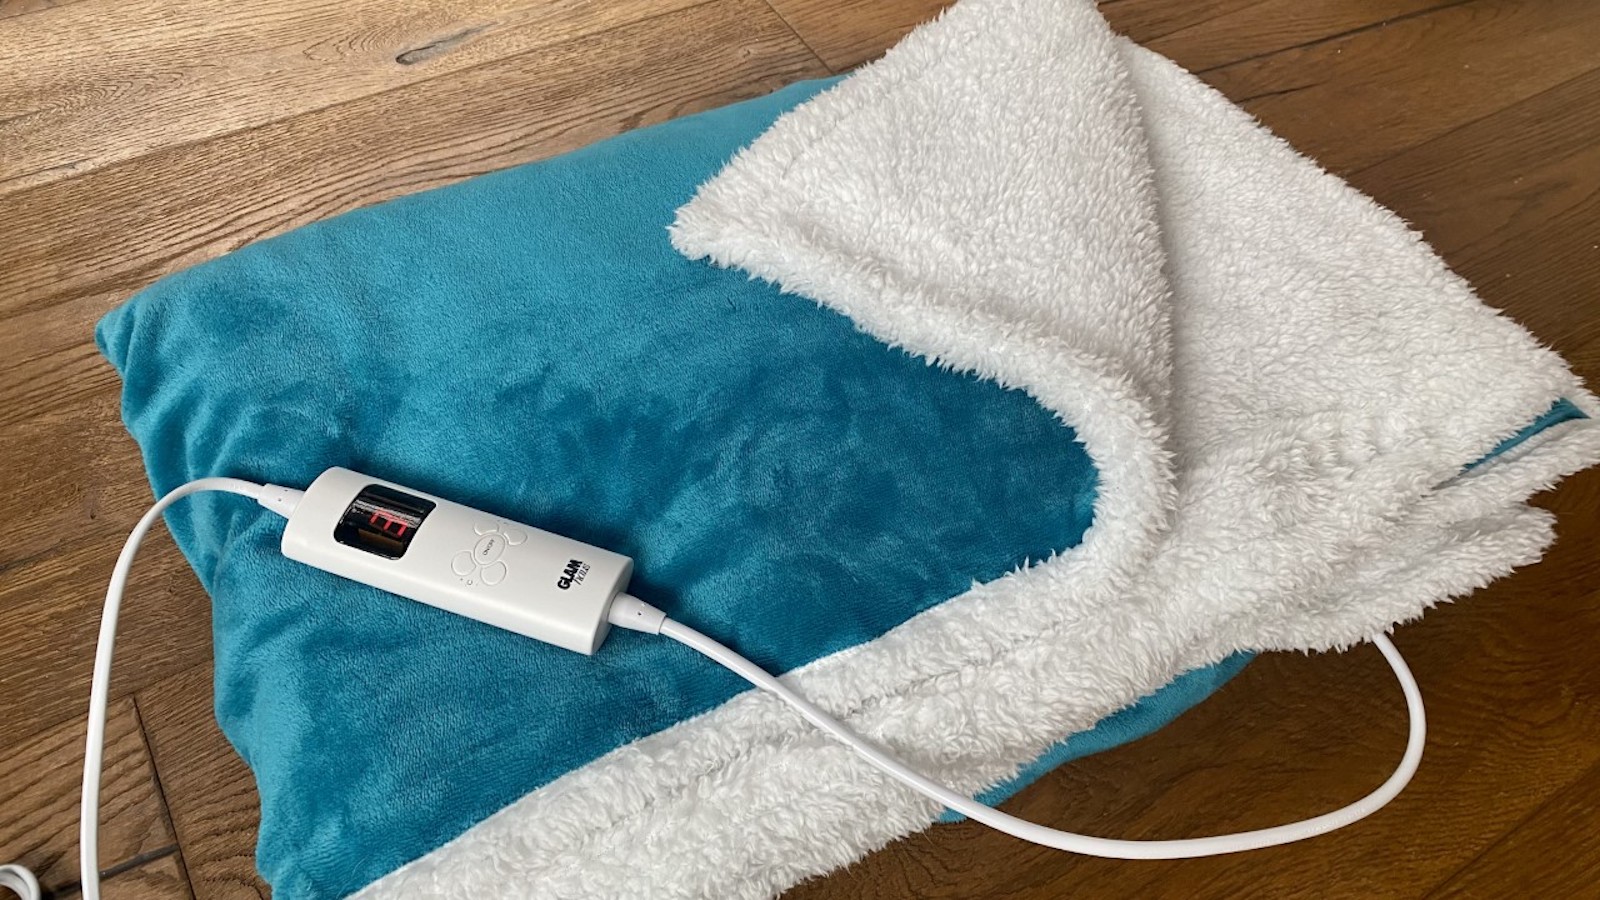 Electric Blanket Buying Guide: What You Need to Know - Tech Advisor